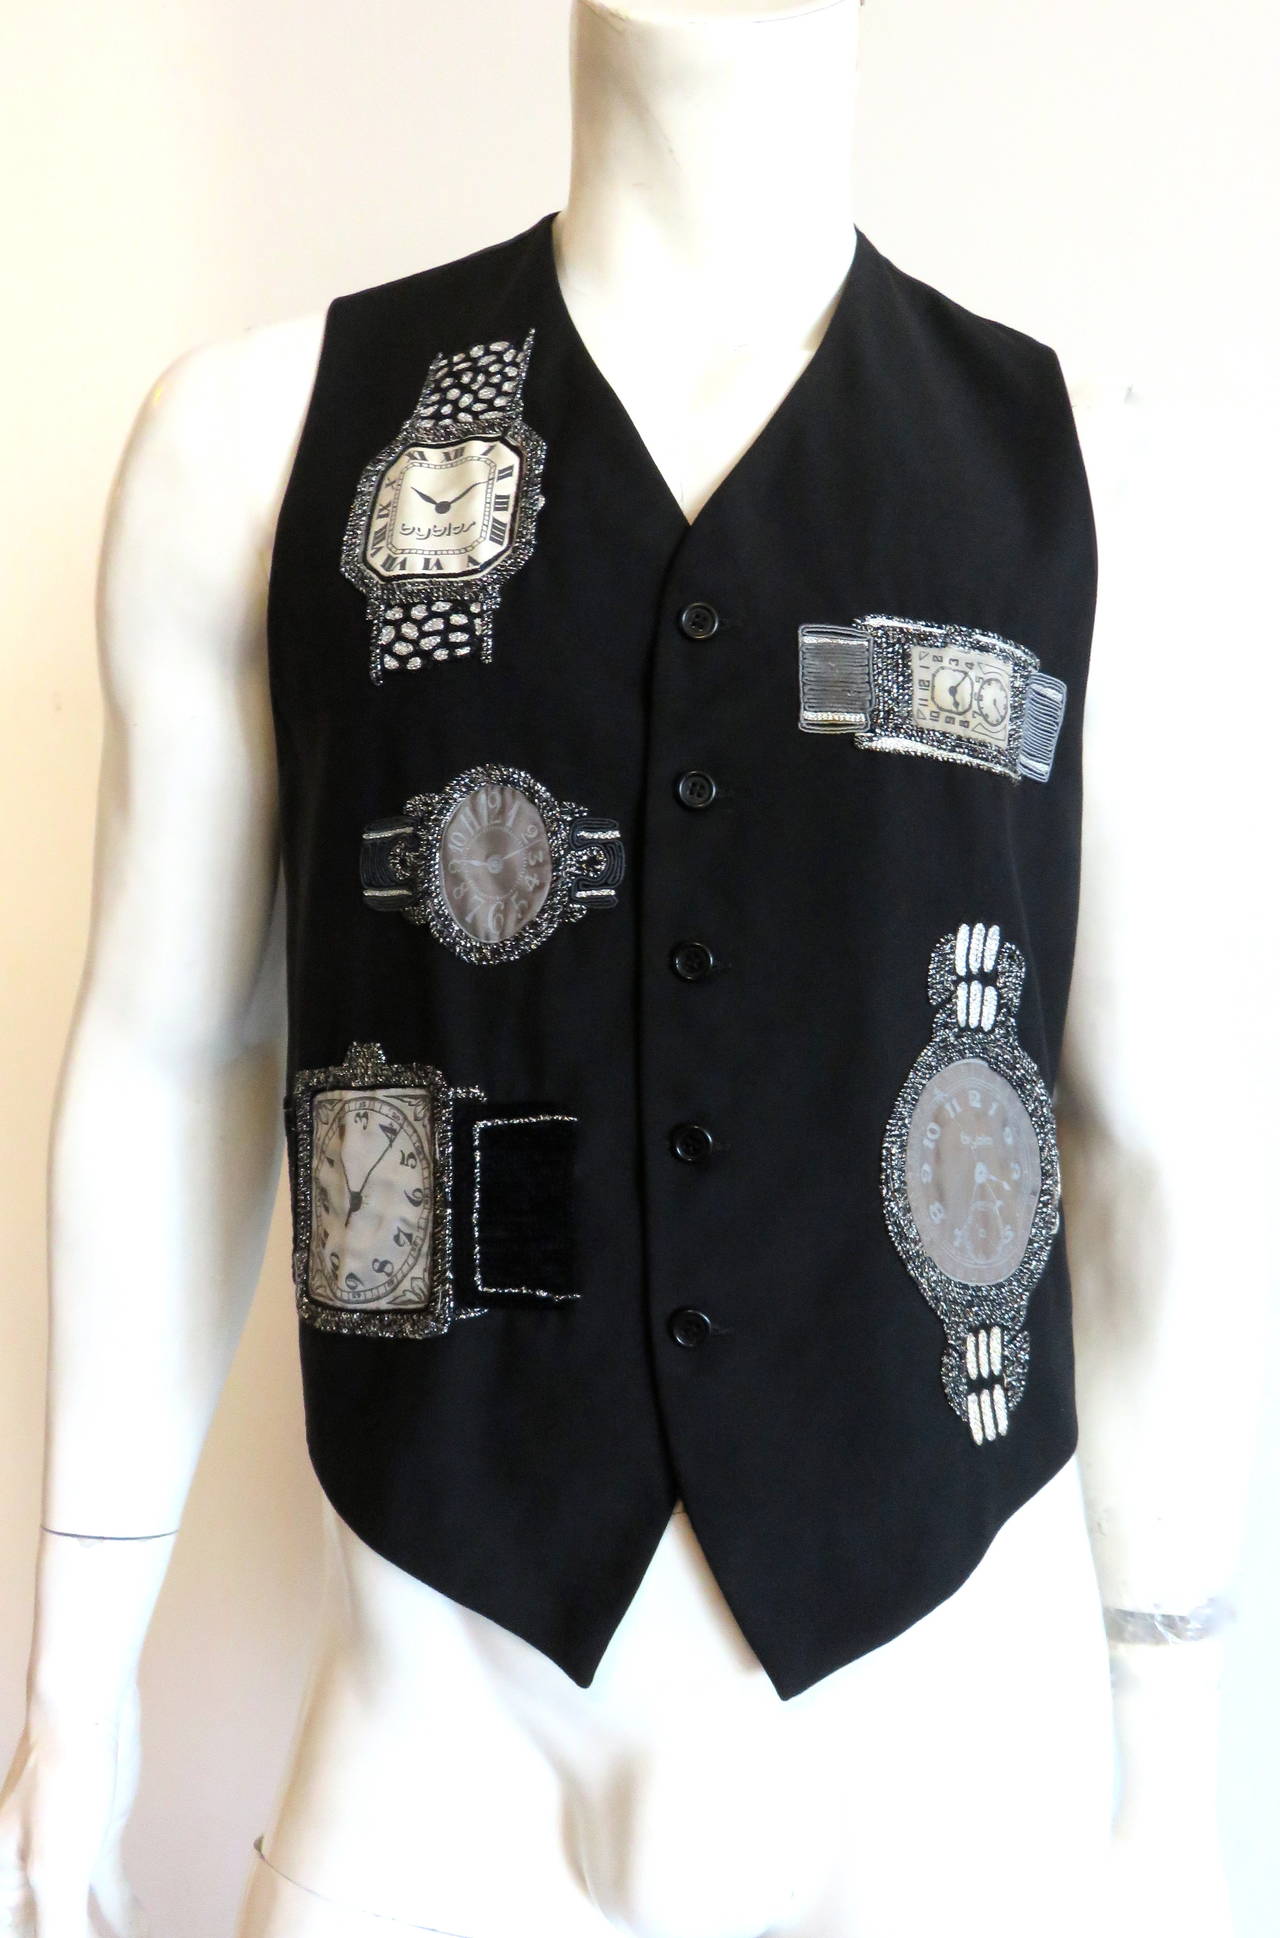 1980's BYBLOS Men's embroidered 'Watch dealer' vest.

This fun vest features black and metallic silver, hand-embroidery with soutache work surrounding jacquard 'Byblos' dial/time faces.  There are also some black, velvet appliqué details as well.